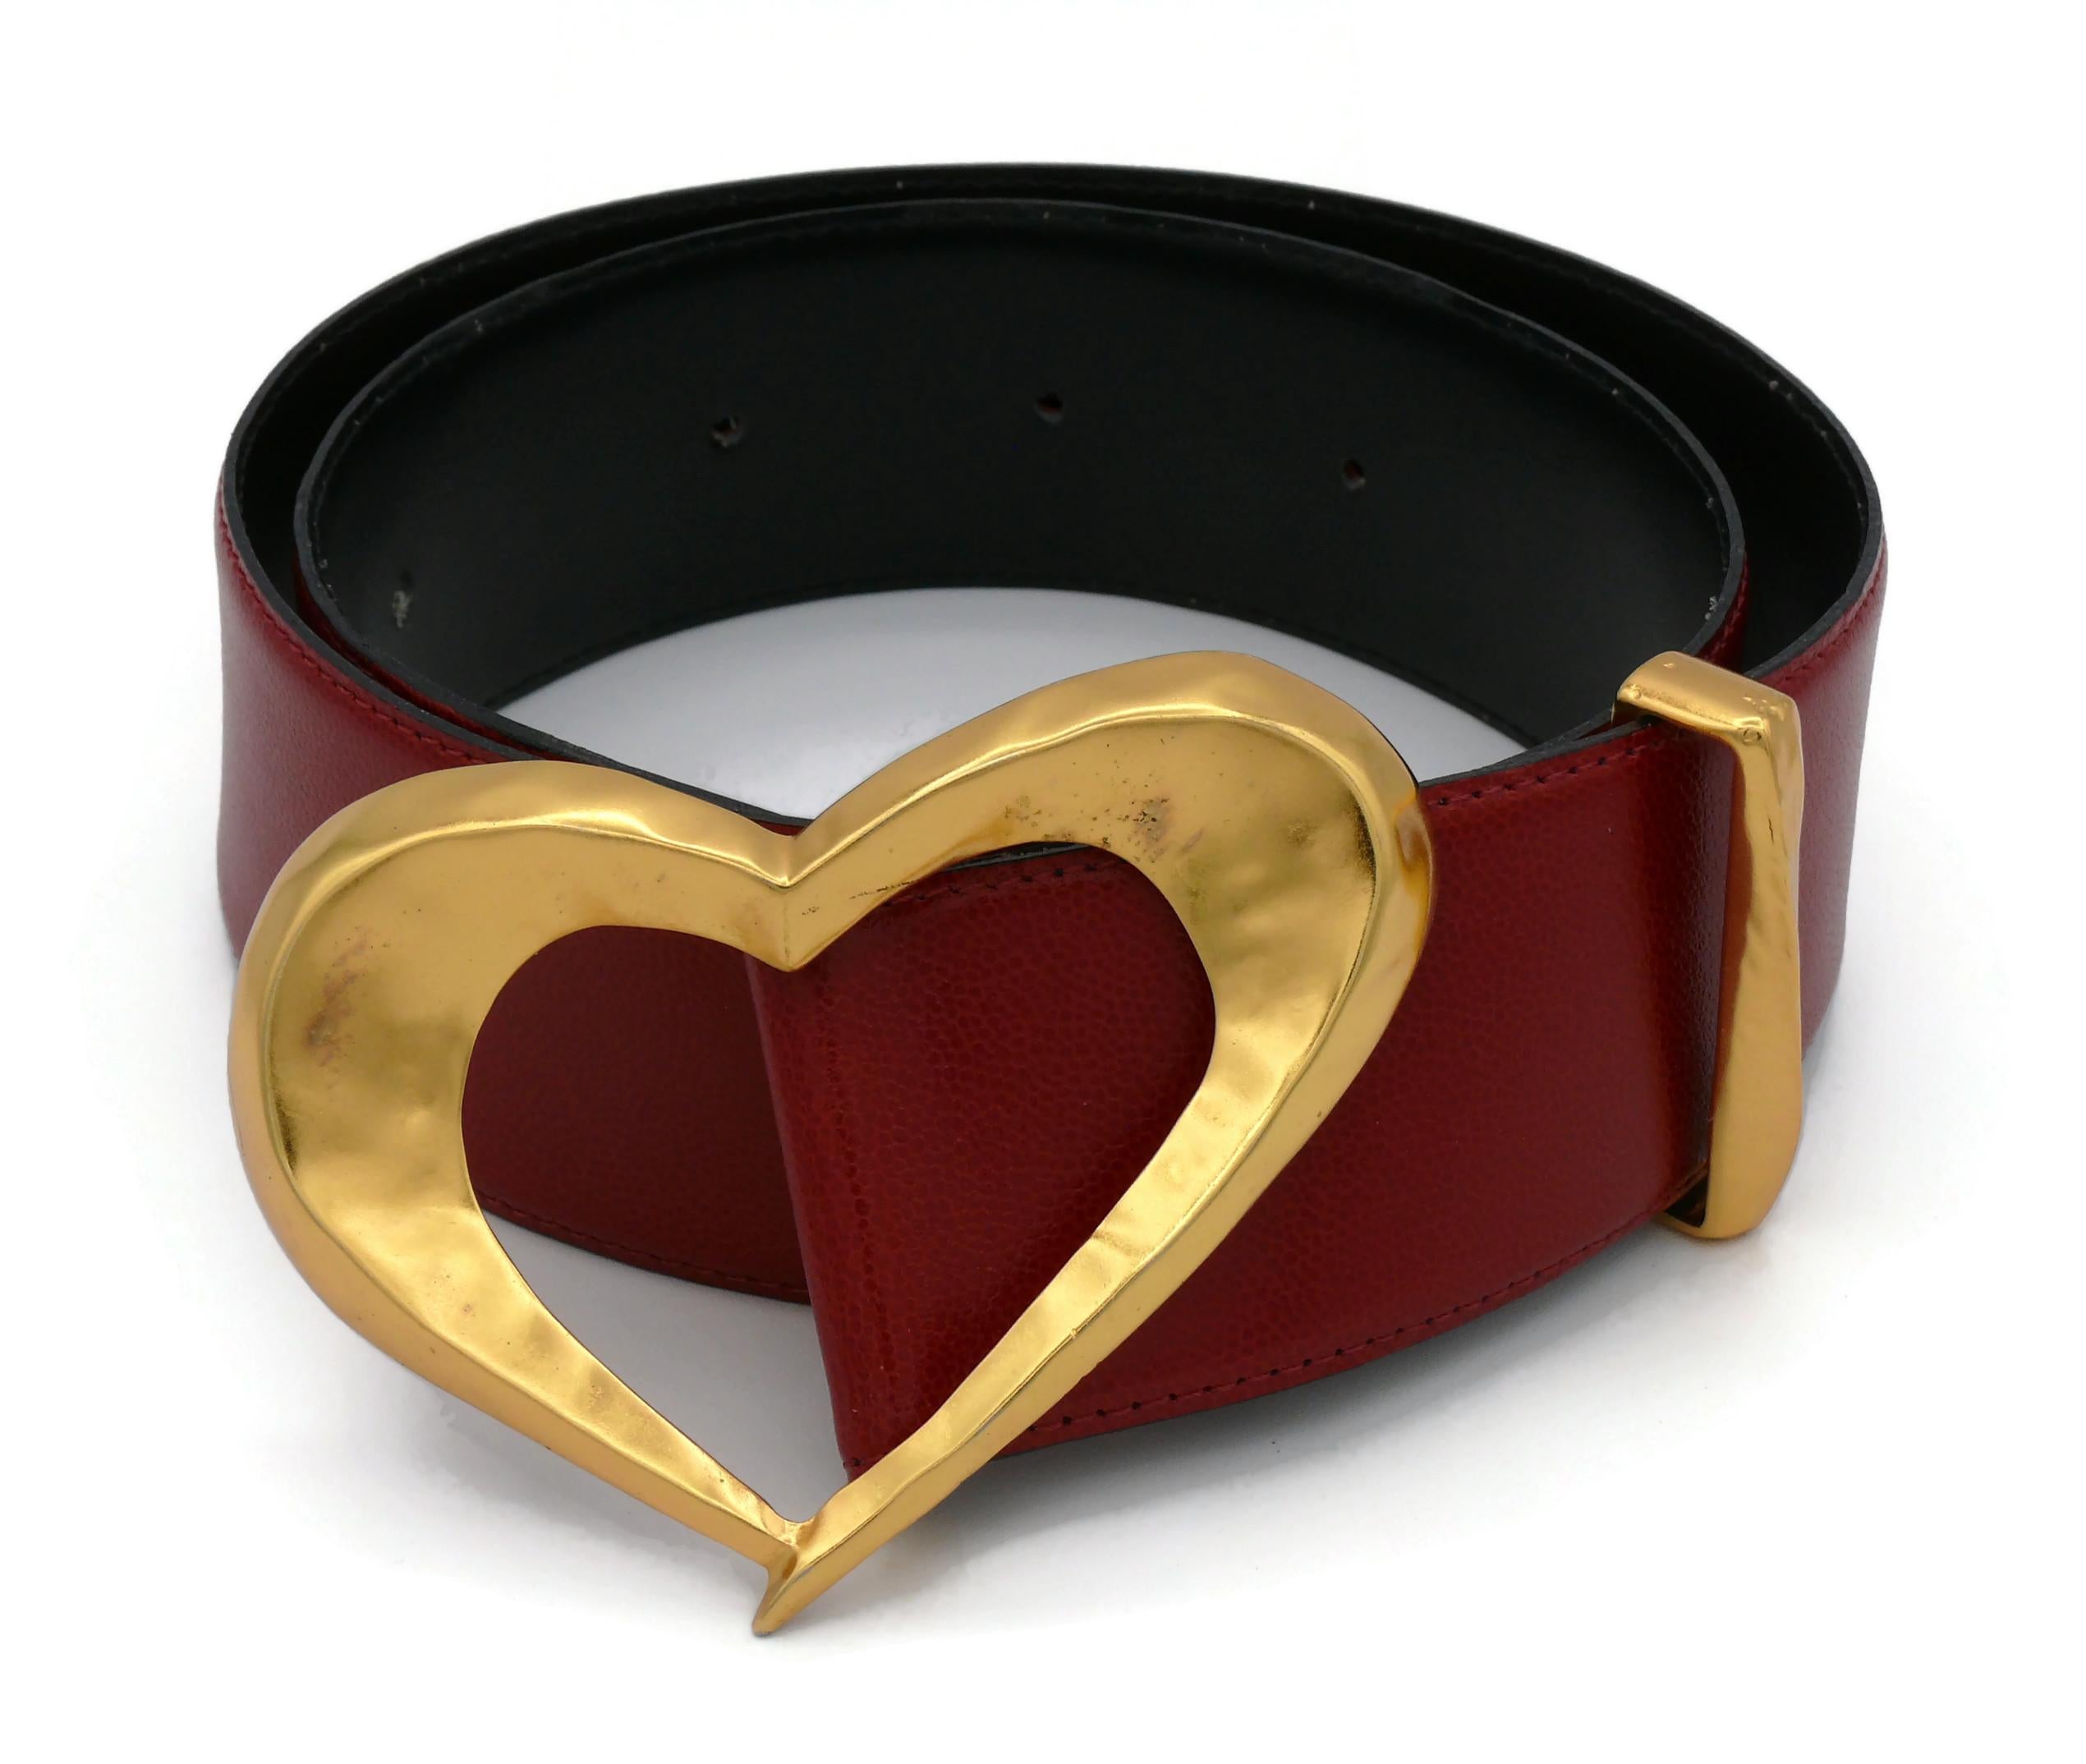 CHRISTIAN LACROIX Vintage Red Grained Leather Belt with Oversized Heart Buckle In Good Condition For Sale In Nice, FR